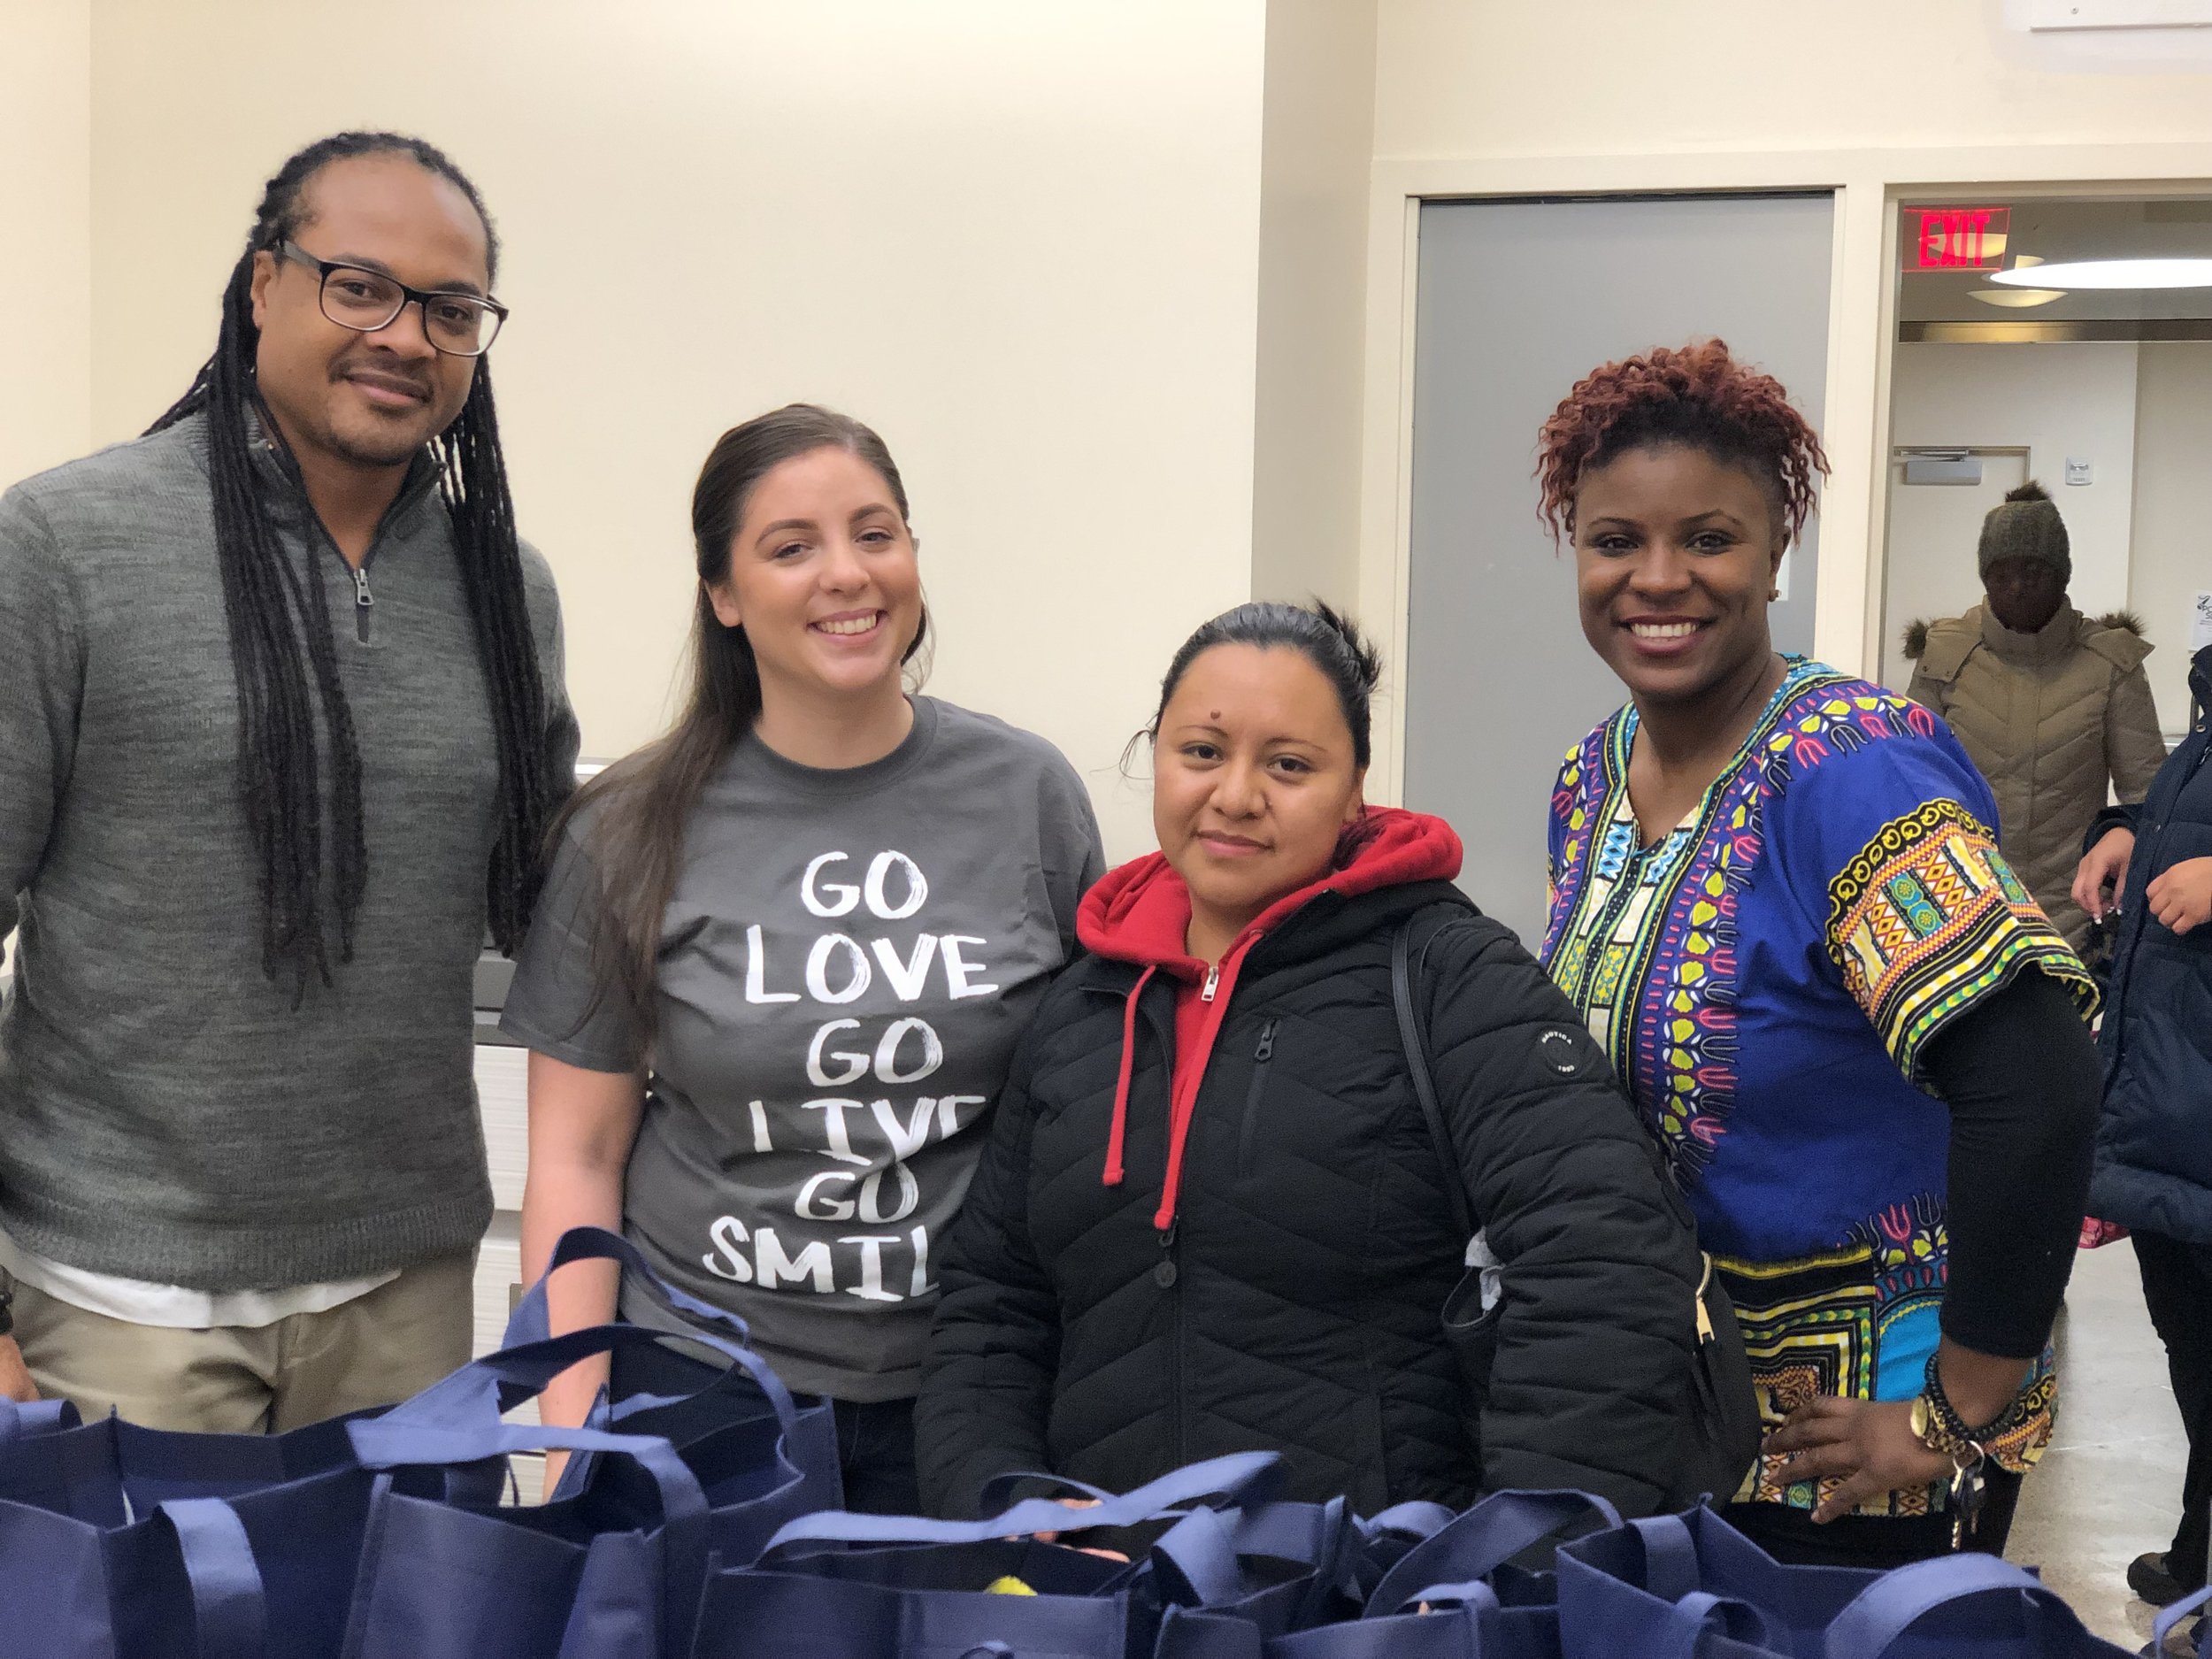 Gerlein staff member stands smiling with members of the donation center. Gerlein bags with donated thanksgiving food items are on the table.